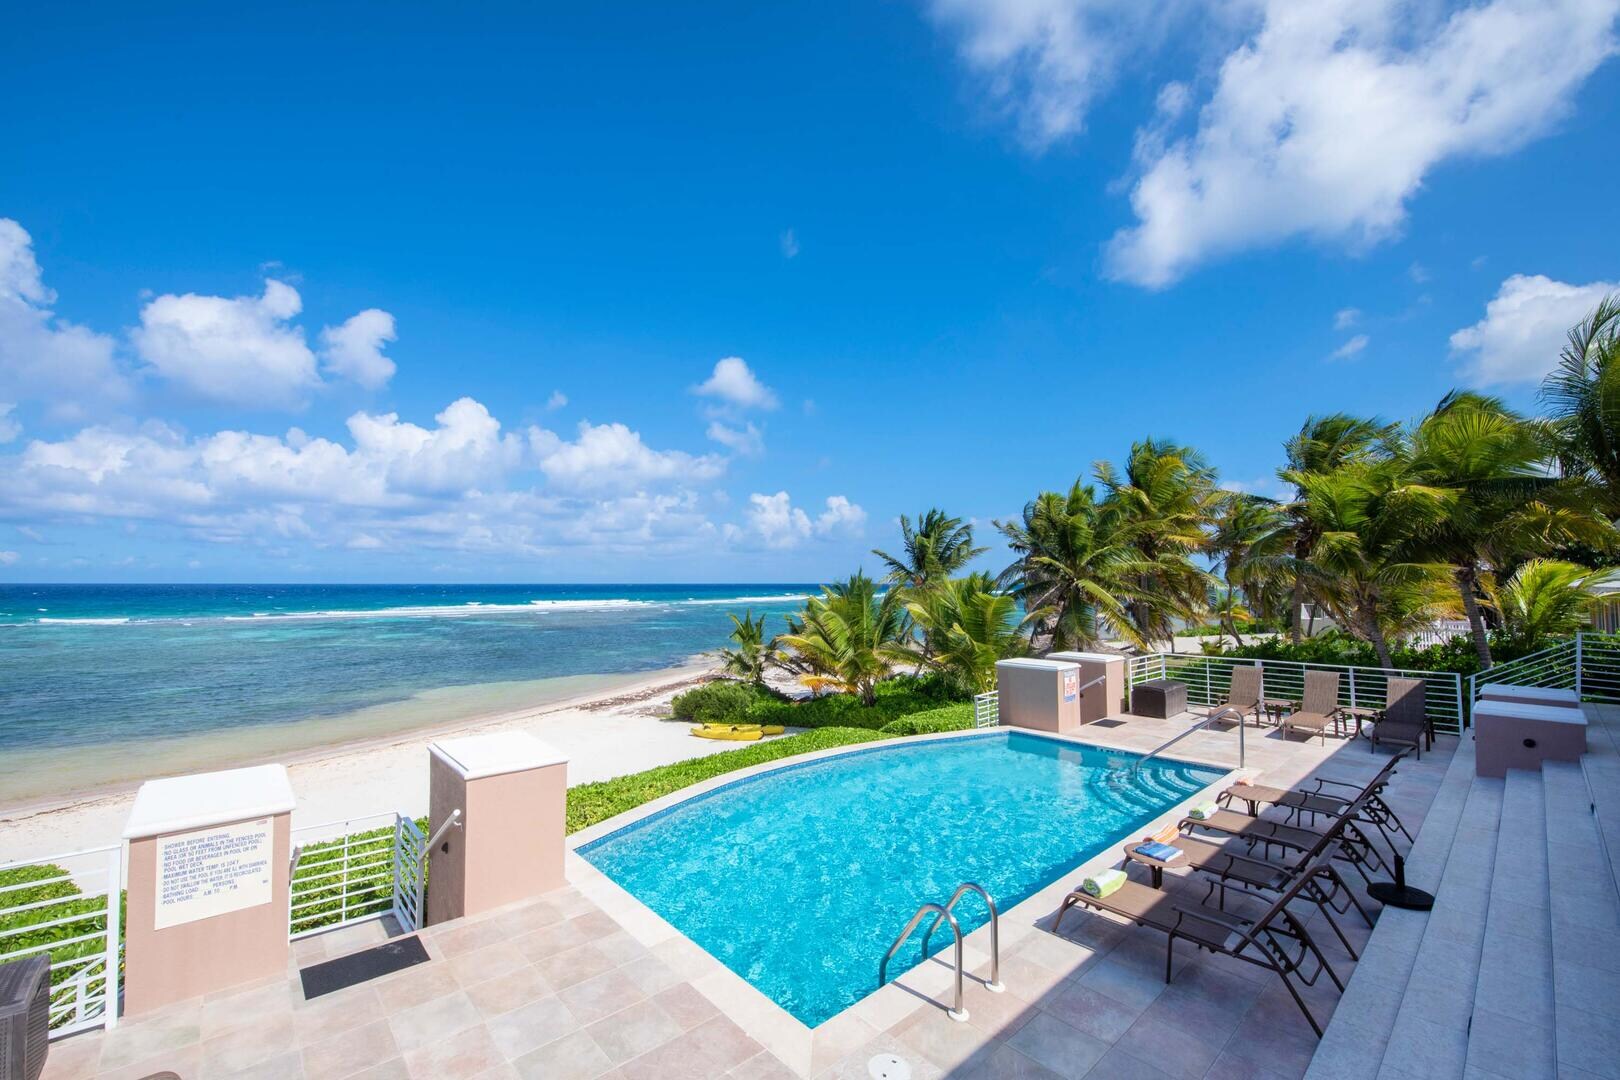 Property Image 1 - Outstanding Oceanfront Villa with Lovely Shaded Veranda